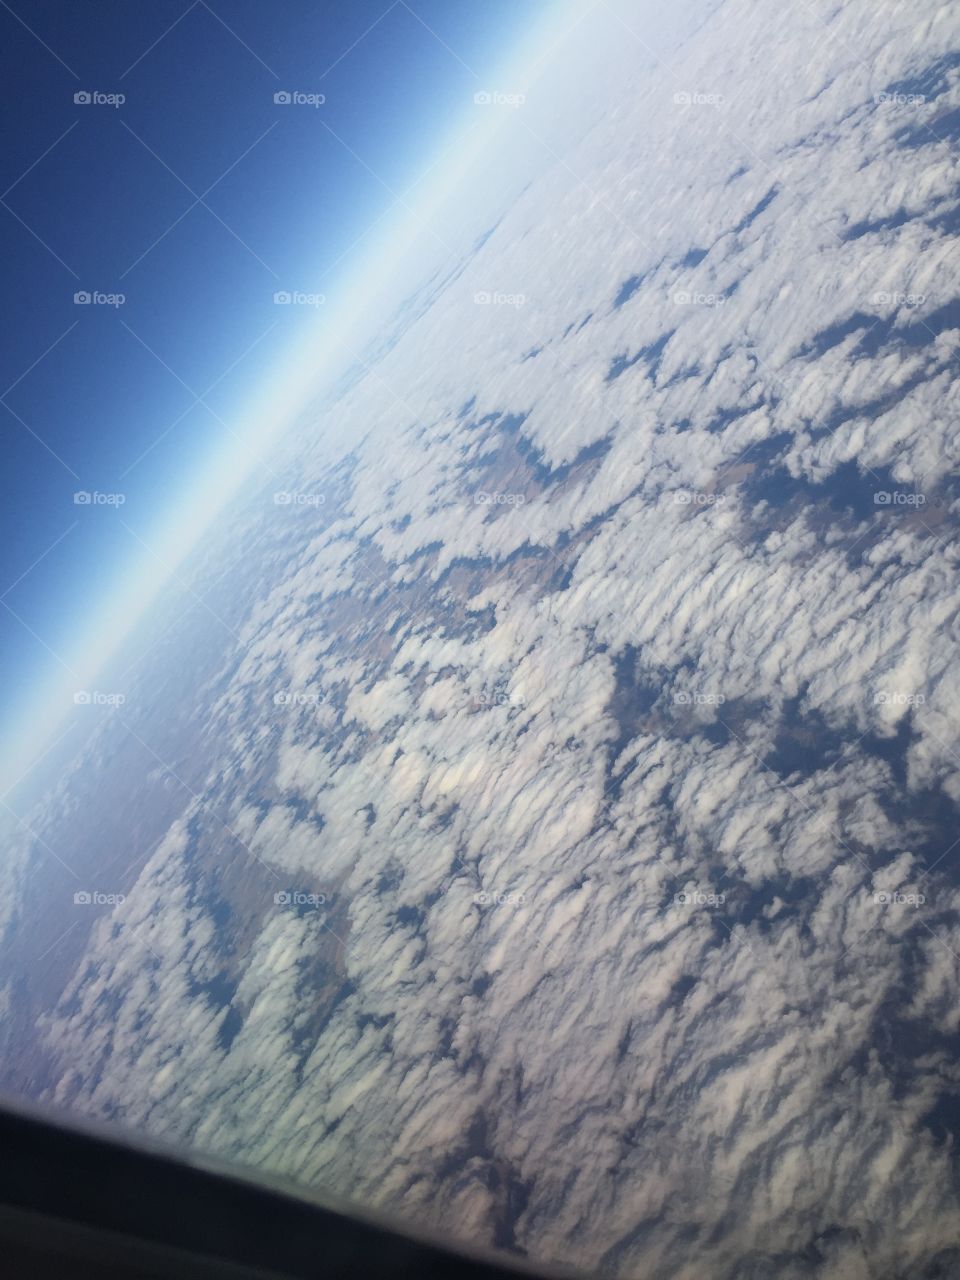 Earth from the plane